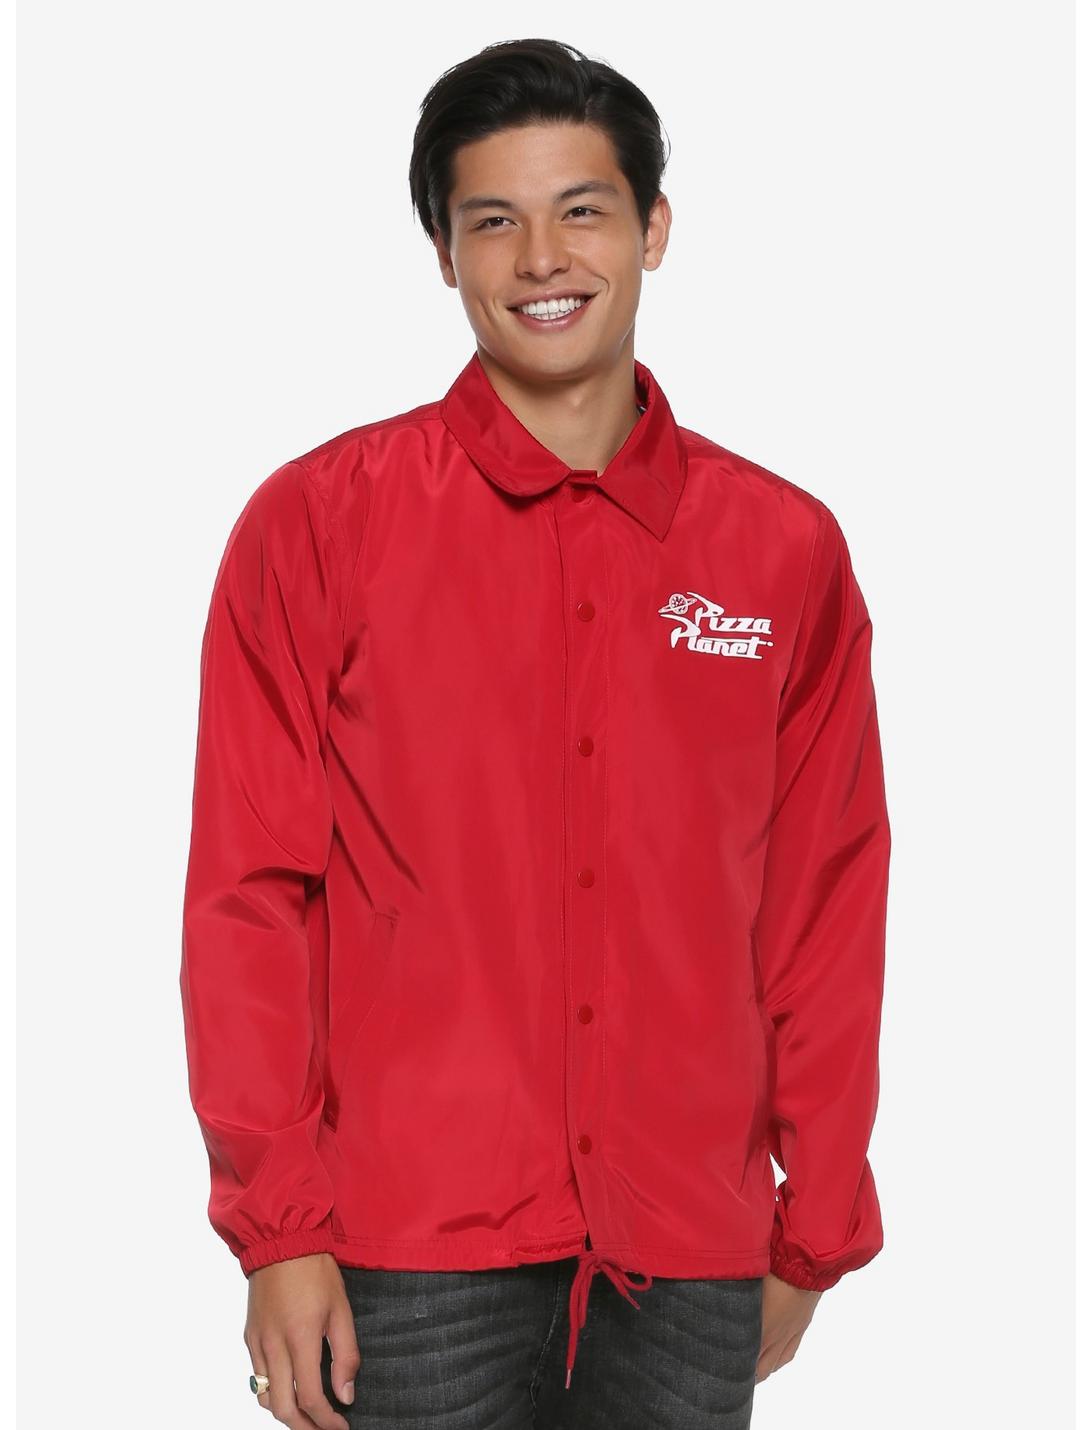 Disney Pixar Toy Story Pizza Planet Coaches Jacket - BoxLunch Exclusive, RED, hi-res